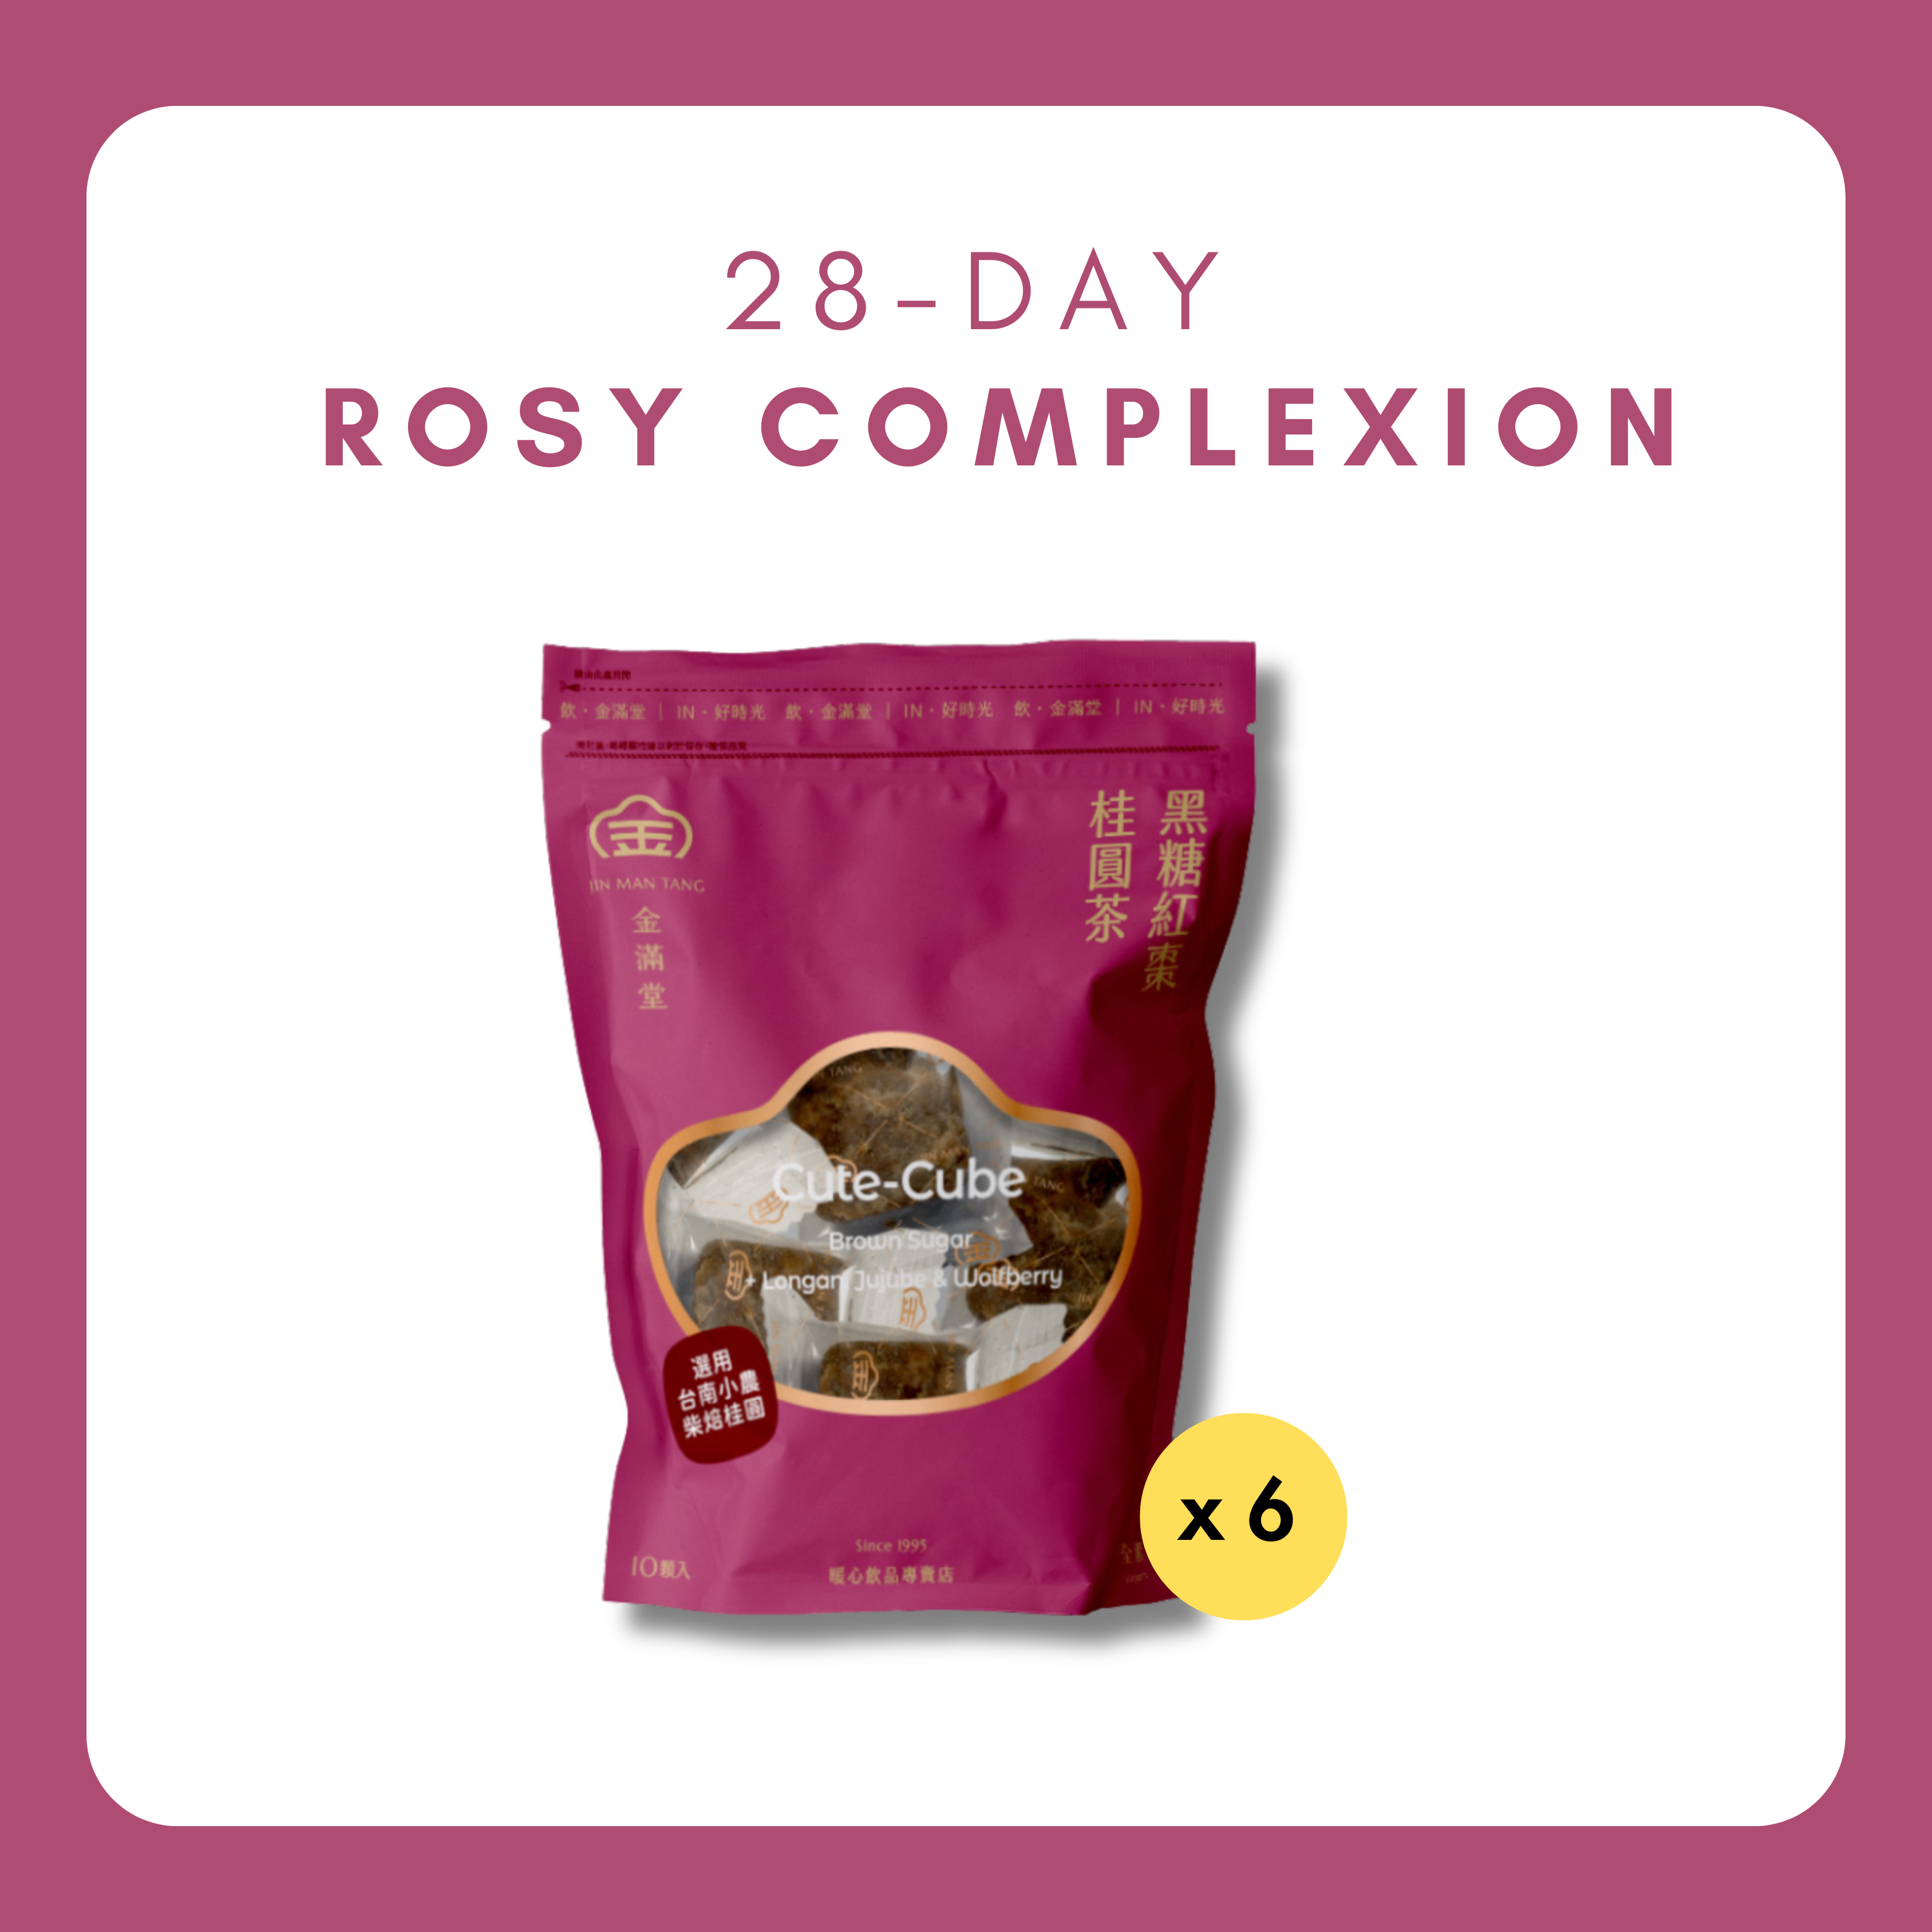 28-Day【Set 3 ：Roxy Complexion】